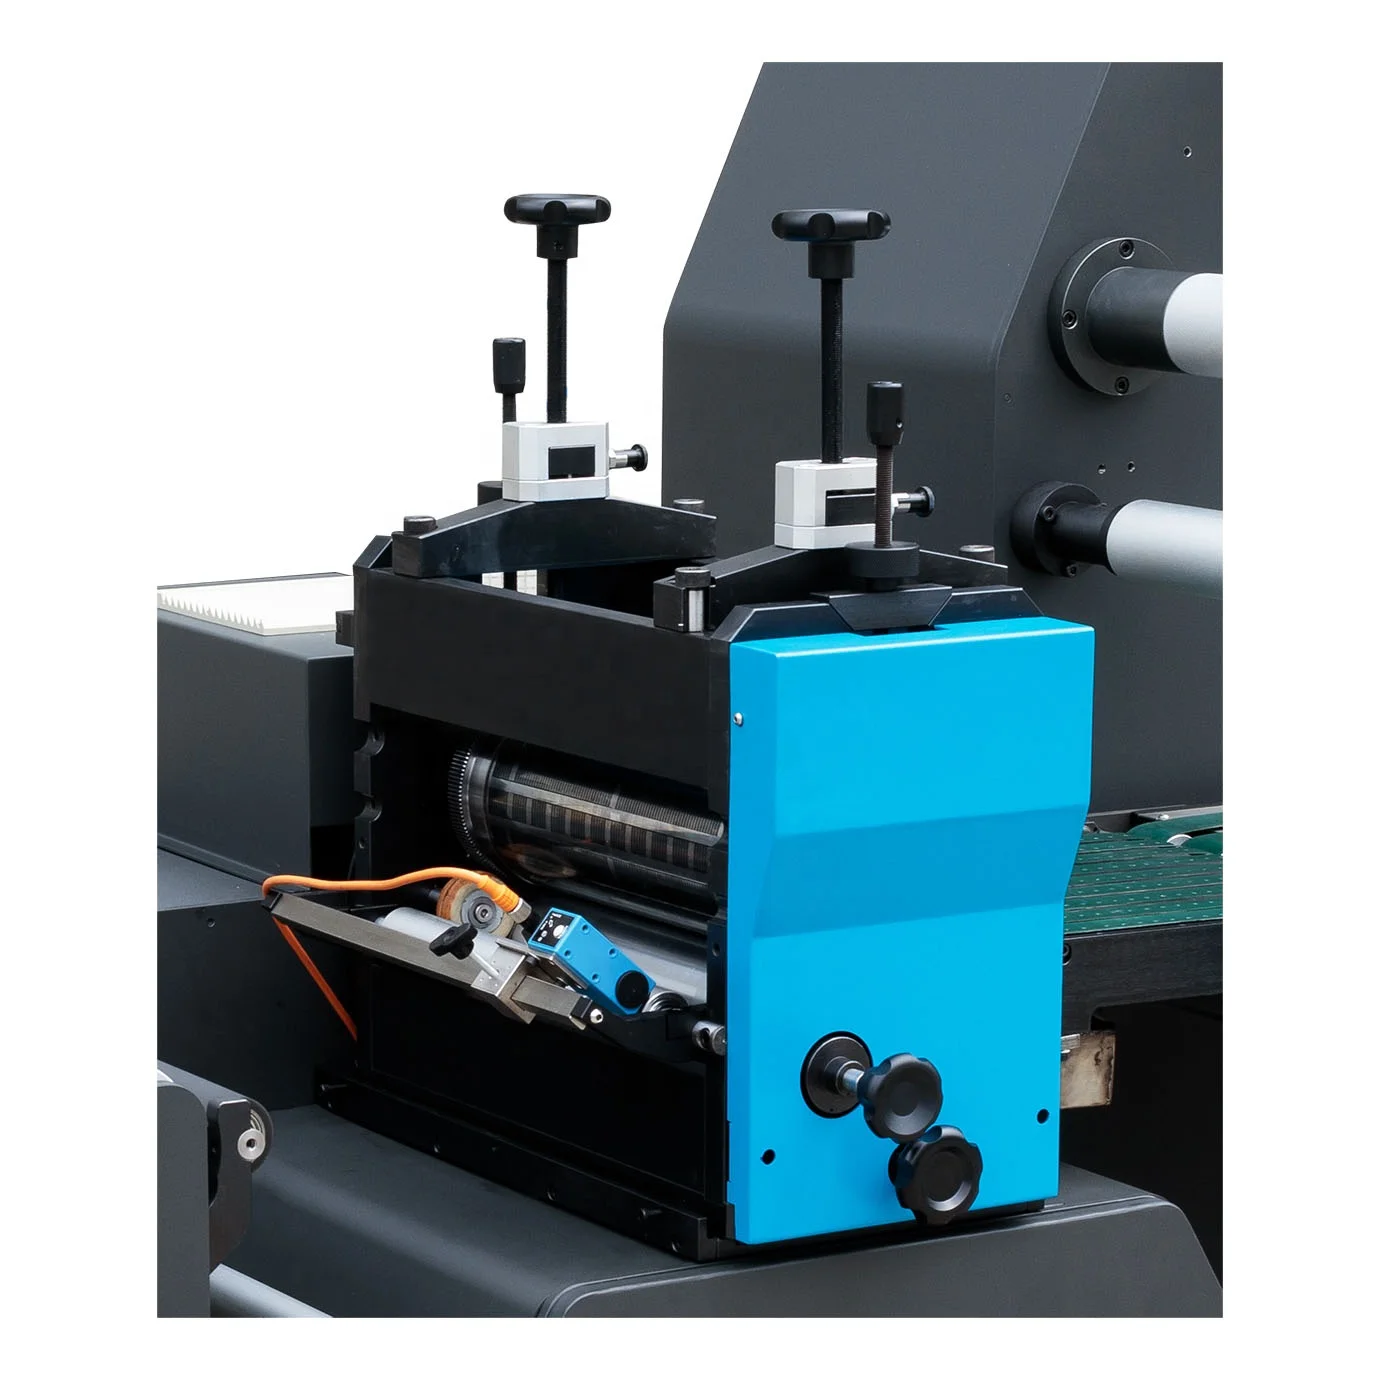 HONTEC RDA-350-3C  2022 New web guide system label rotary die cutting machine with  3-color flexography and slitter